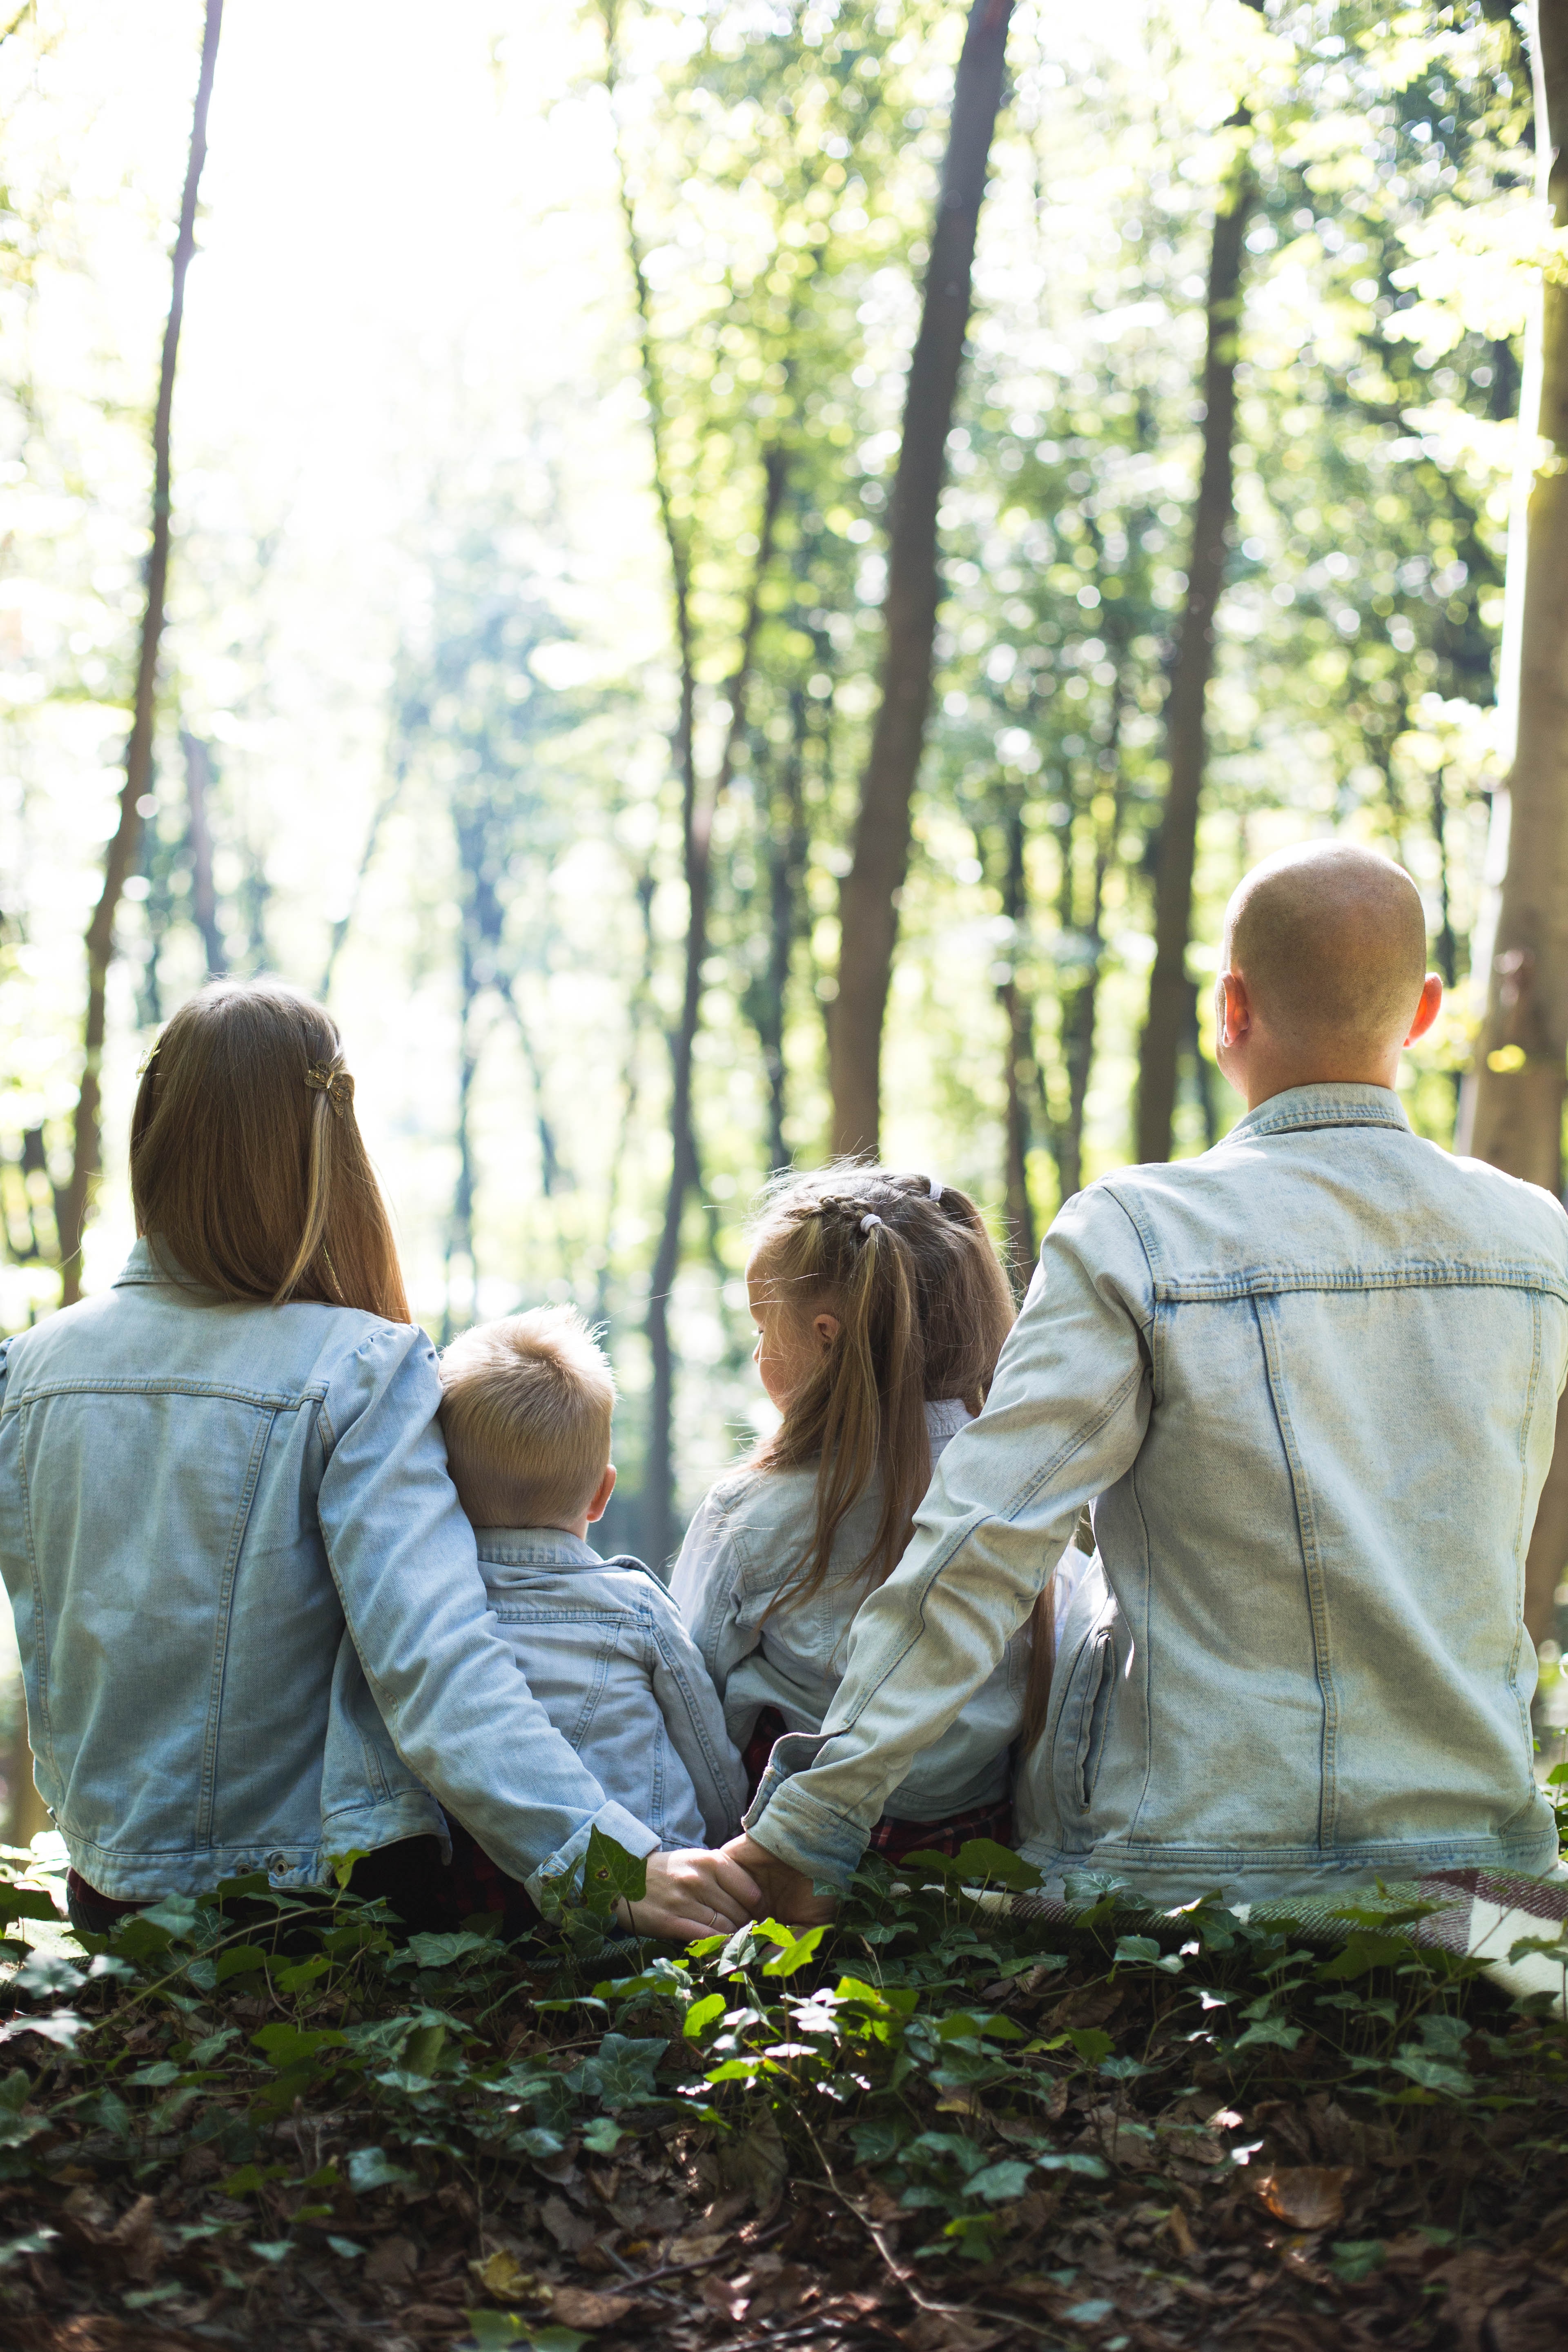 A family sitting in nature together. | Source: Unsplash